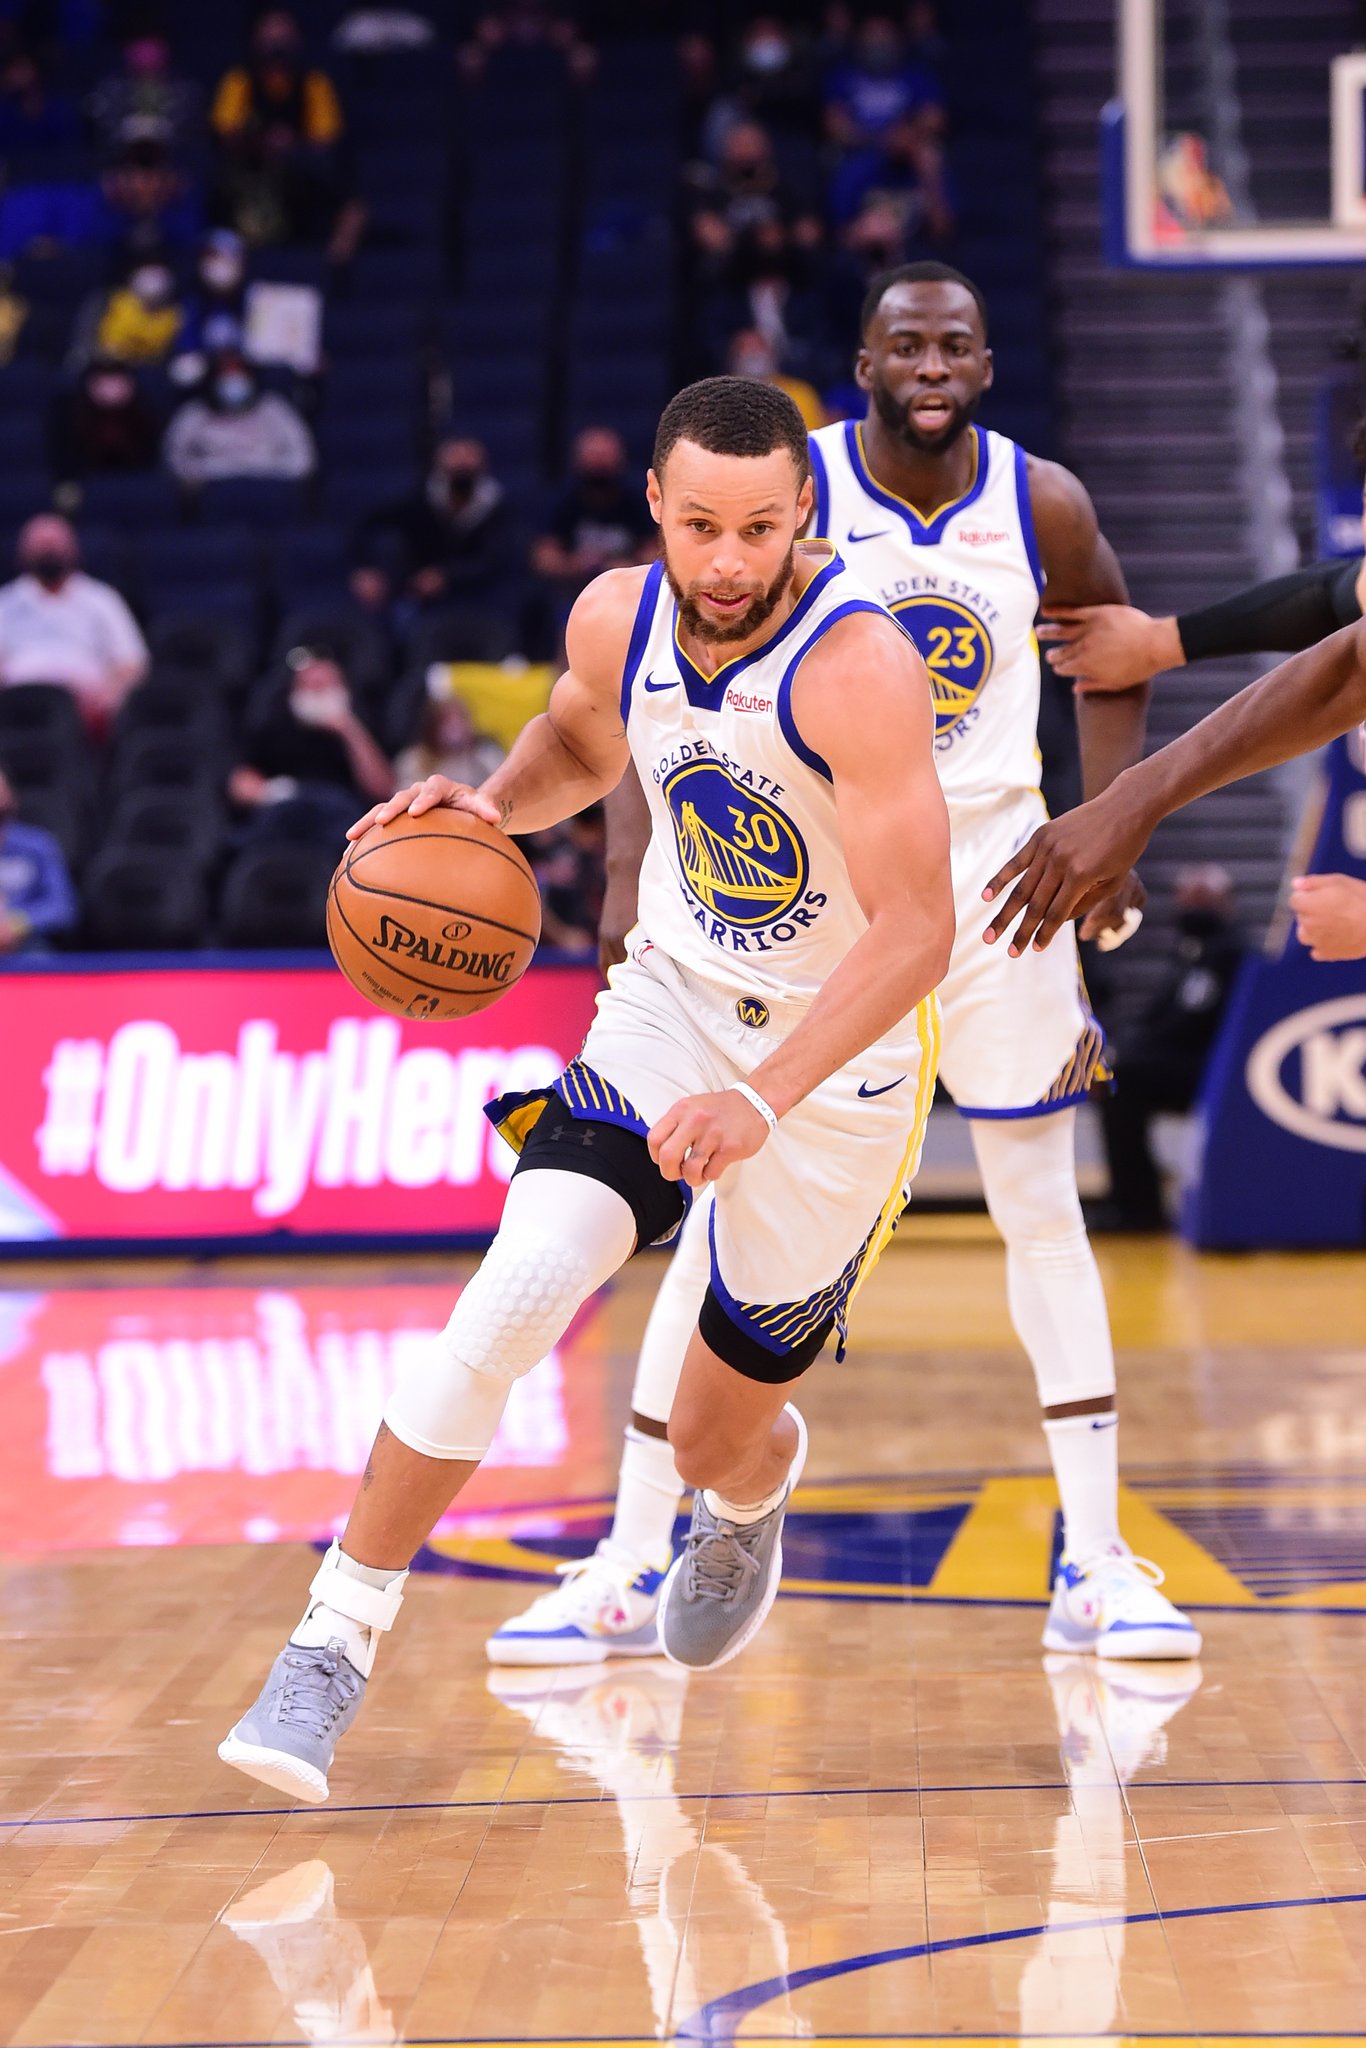 Steph Curry joins Michael Jordan in record books with 2020-21 scoring title